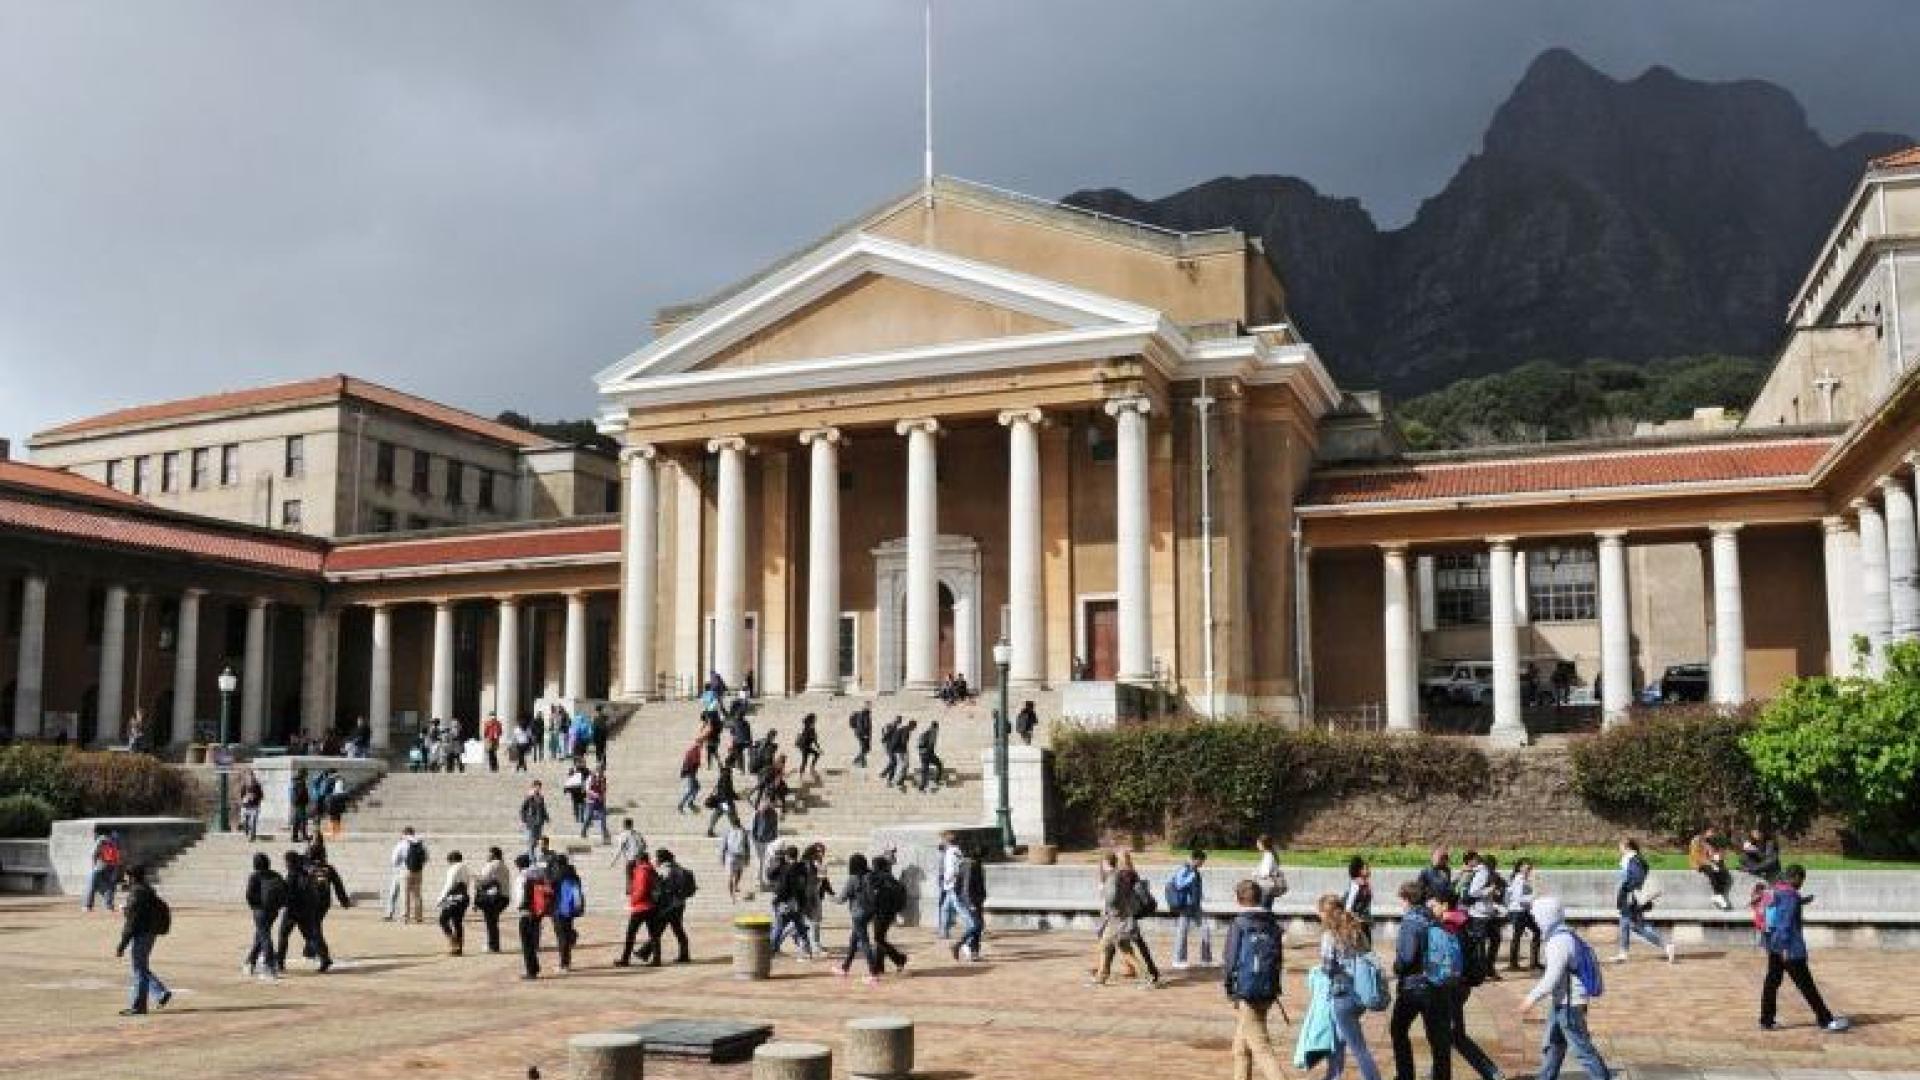 Students infront of University of Cape Town